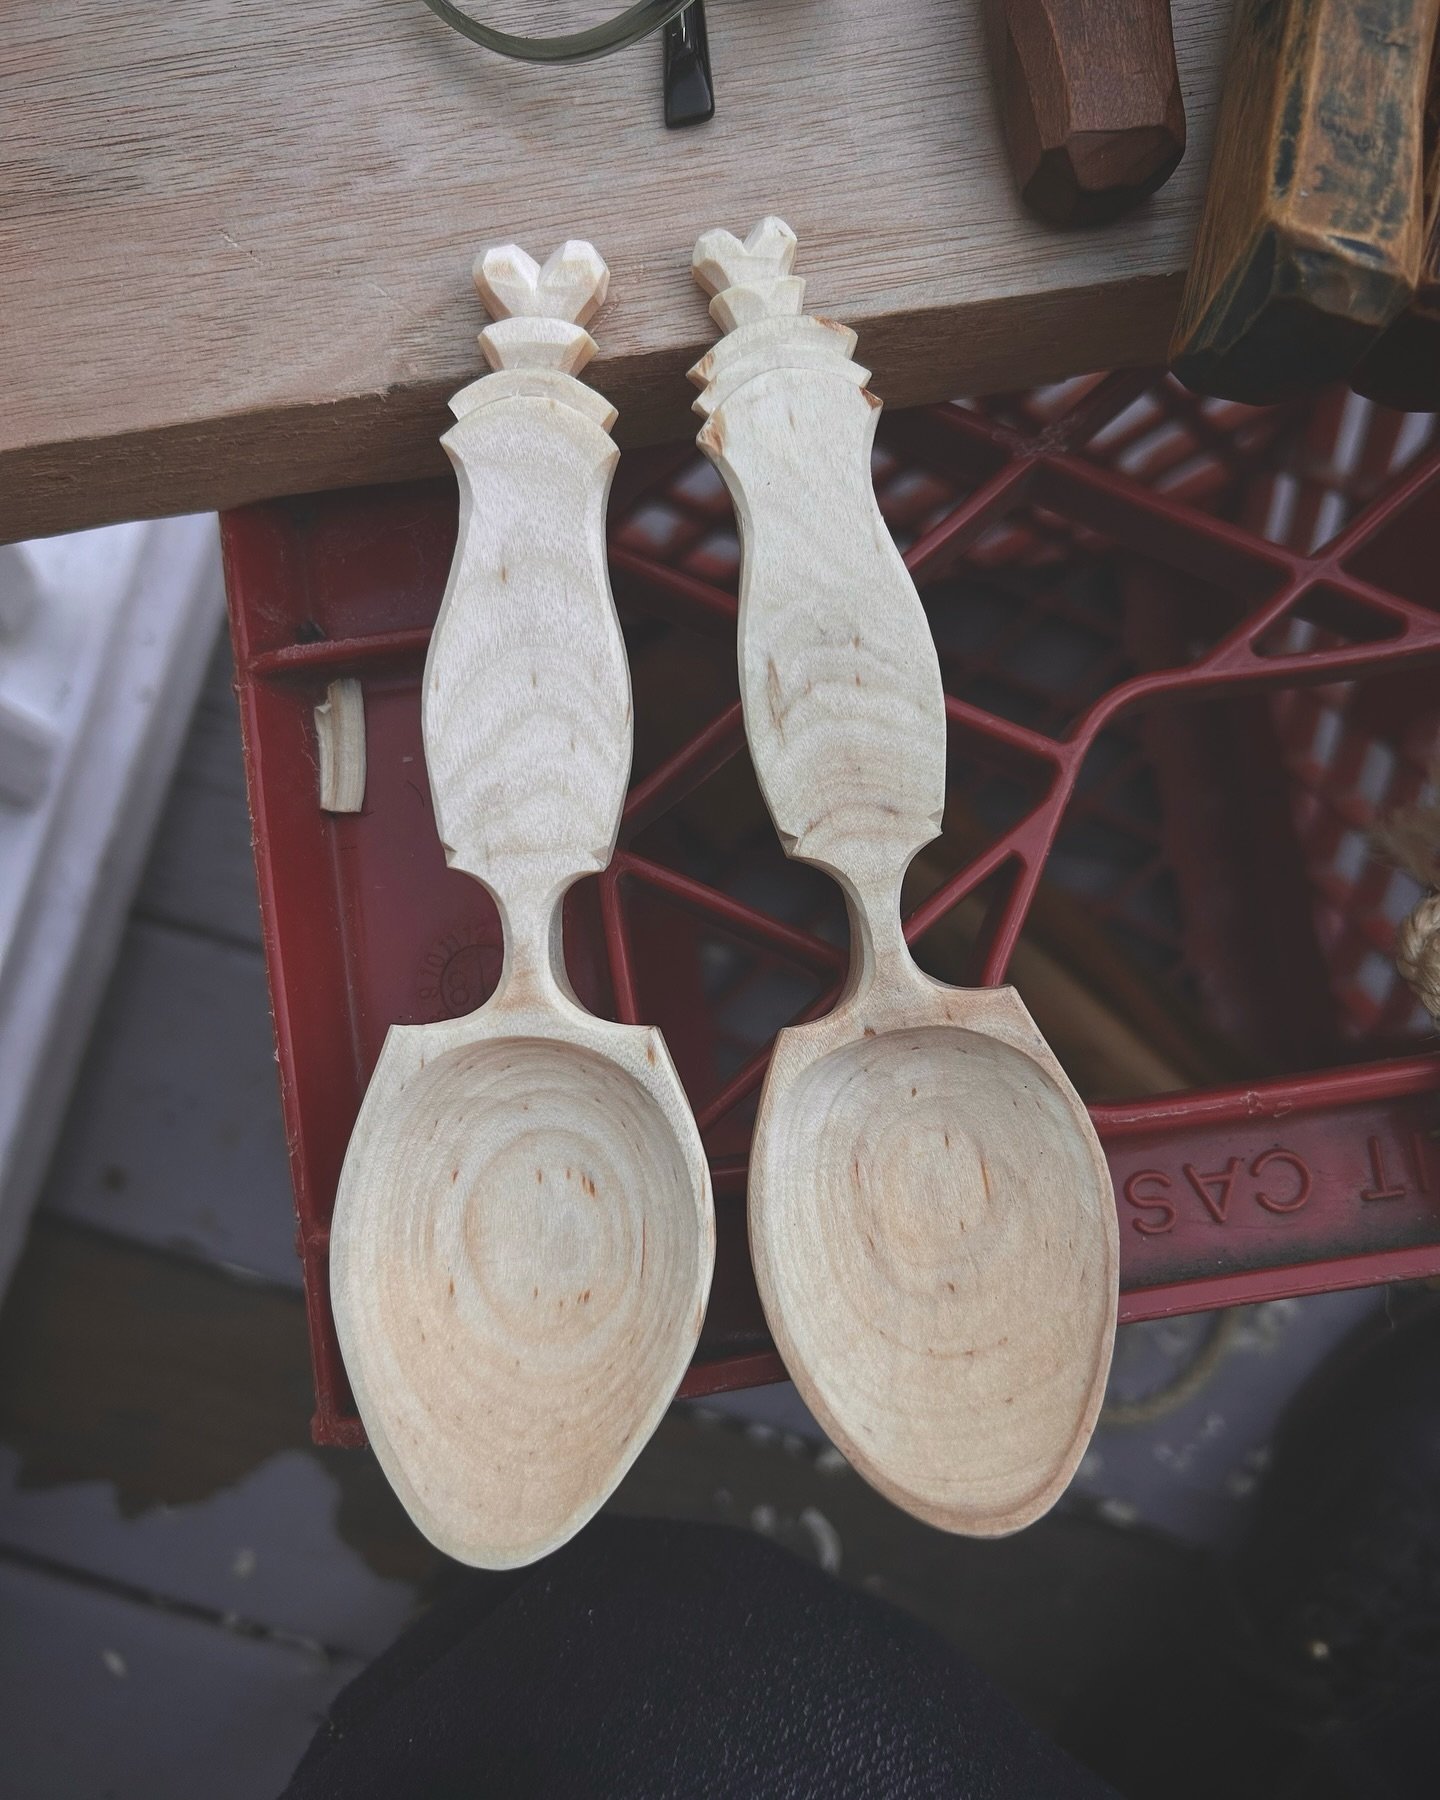 Two spoons for the day. Later on I&rsquo;ll add more chip carvings and paint them. 
 
 
 
 
 
 
 #spooncarving #greenwoodworking #kuksa #sloyd #spoons #handcraft #handmade #maker #kitchendecor #woodenspoons
#handcarved #weddinggift #slowcraft #bushcr